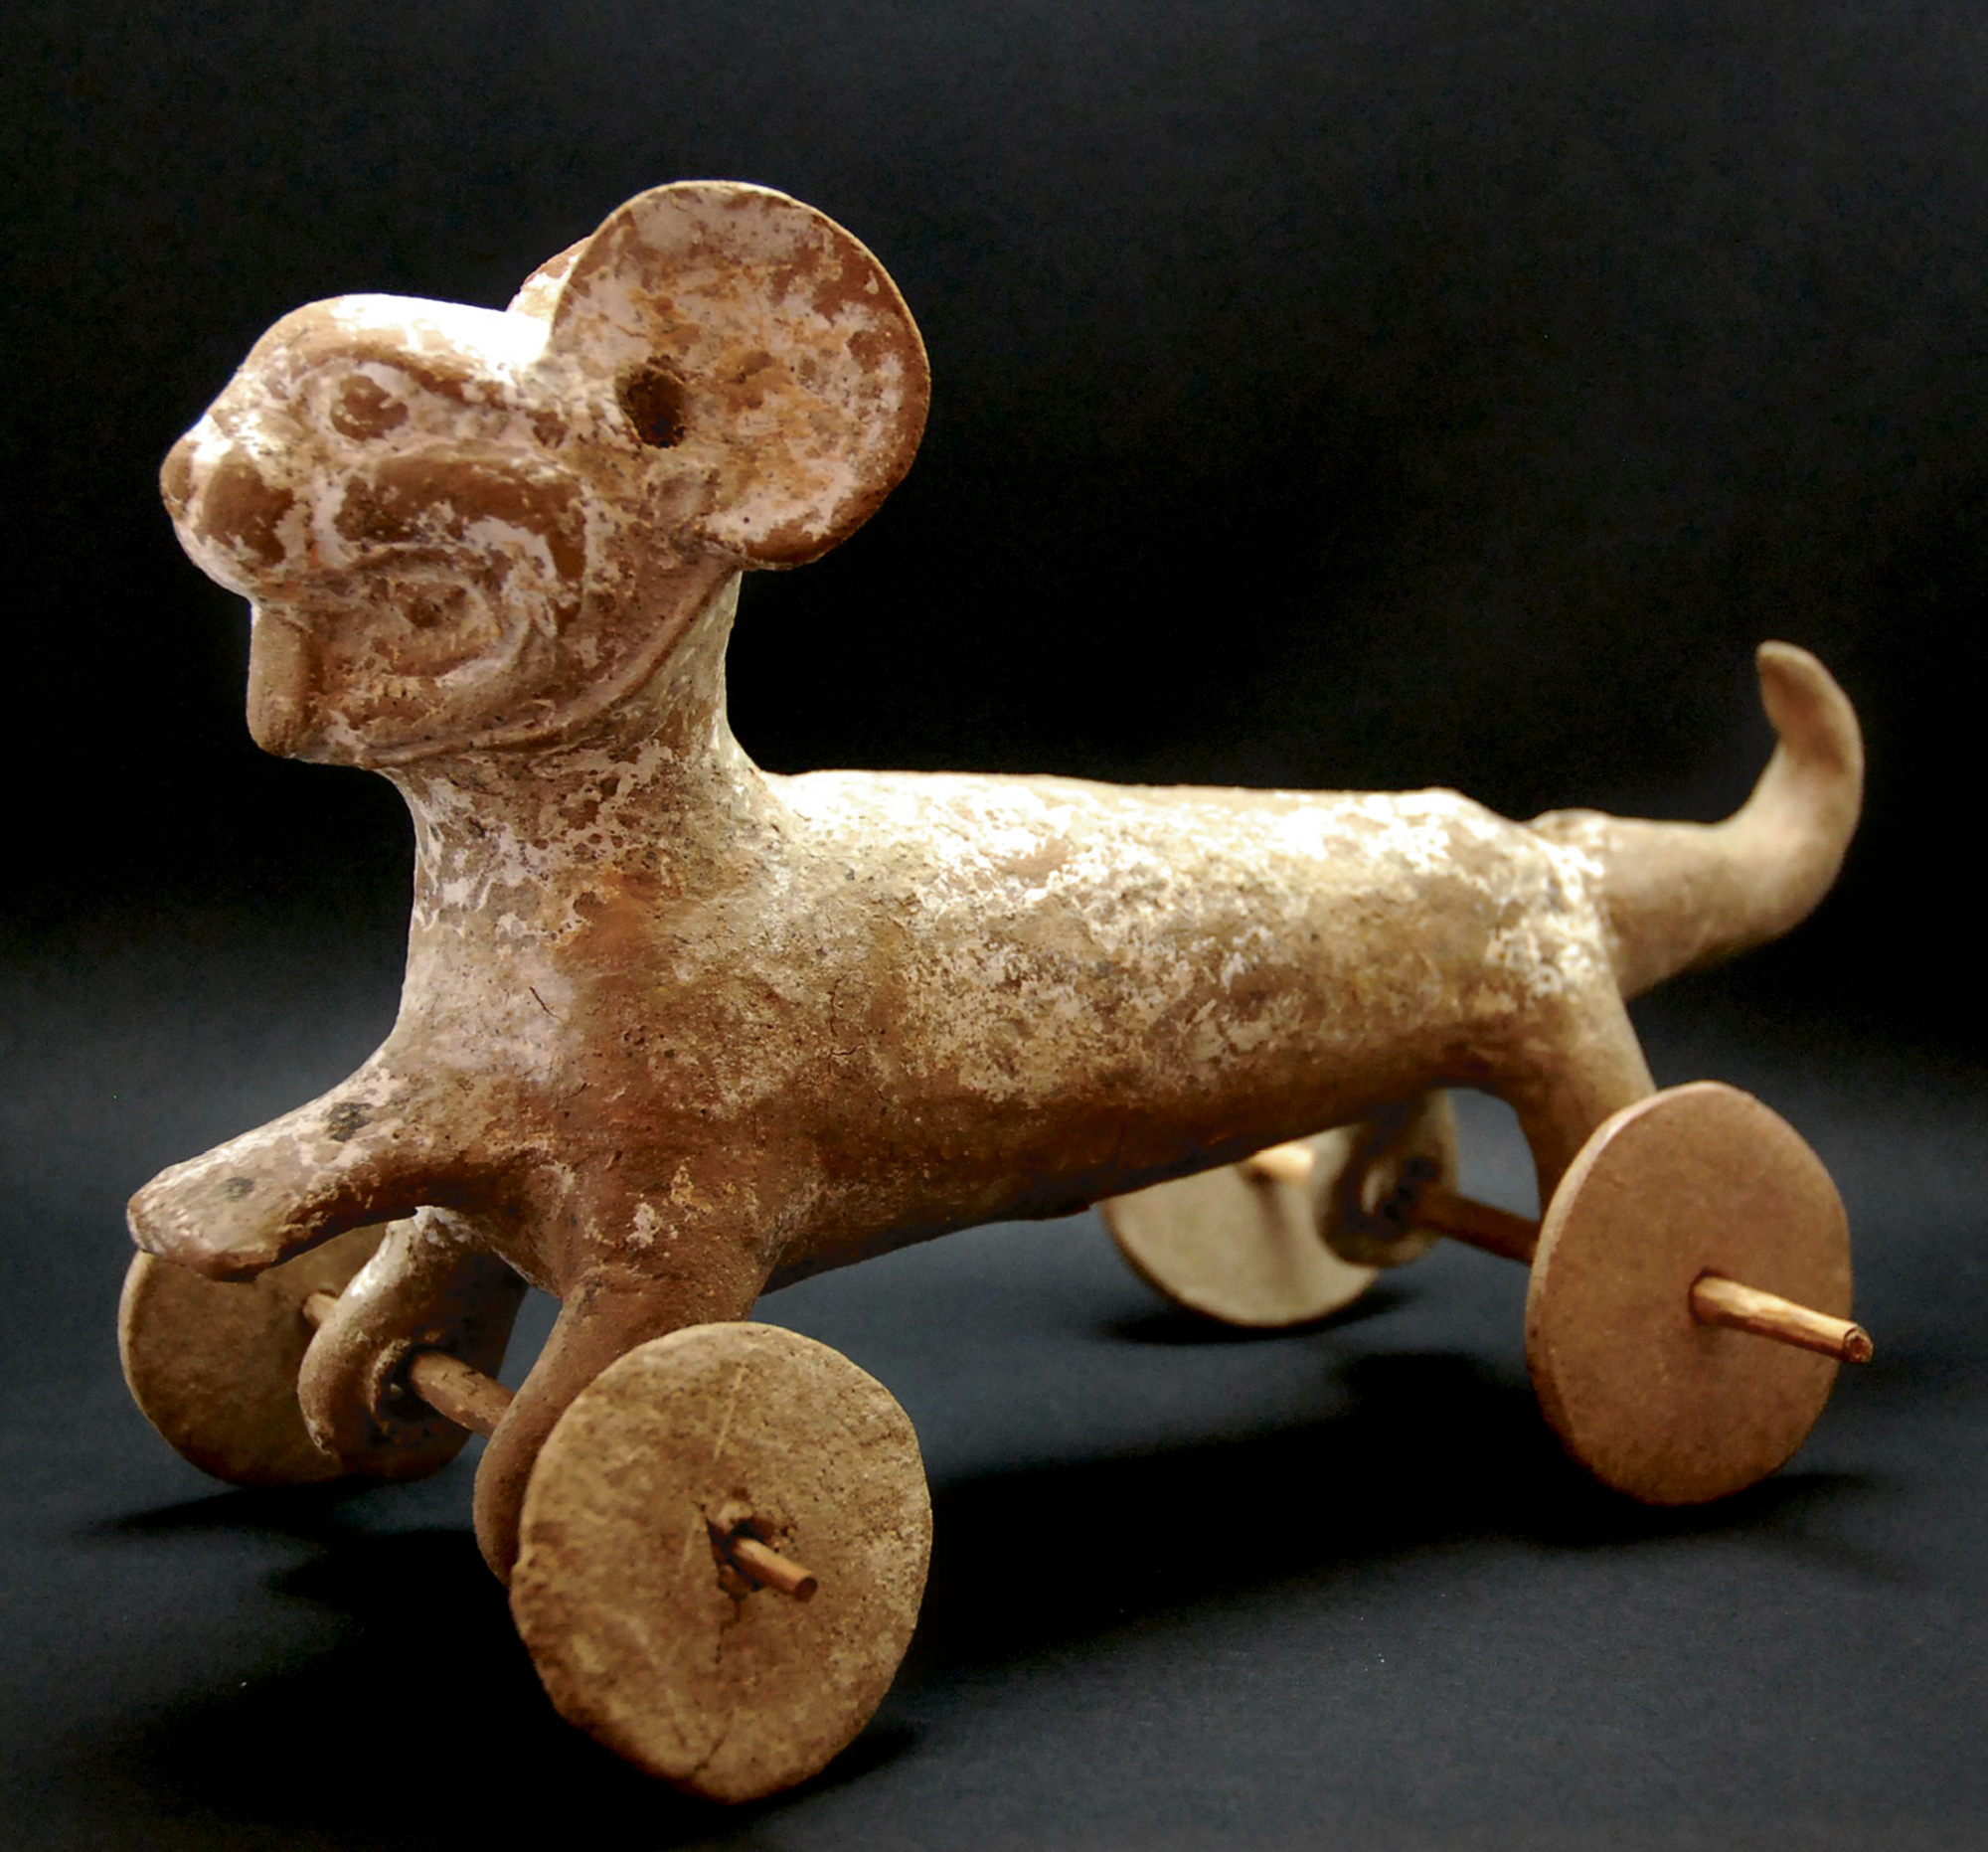 A small figurine of an animal with wheels for legs.